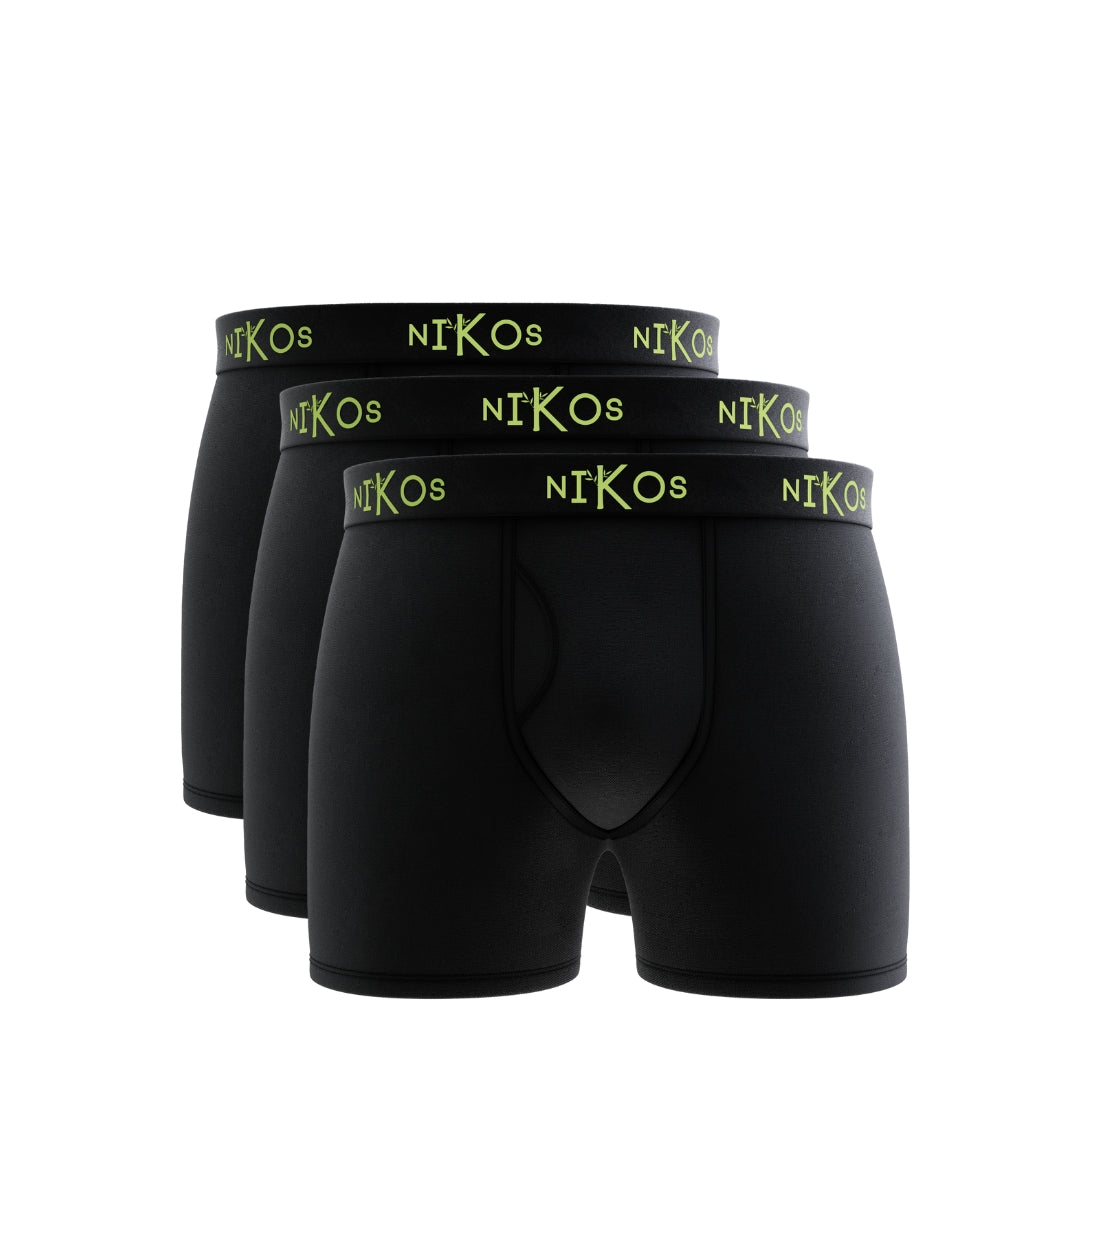 Three-pack of Nikos Bamboo Boxer Briefs in black